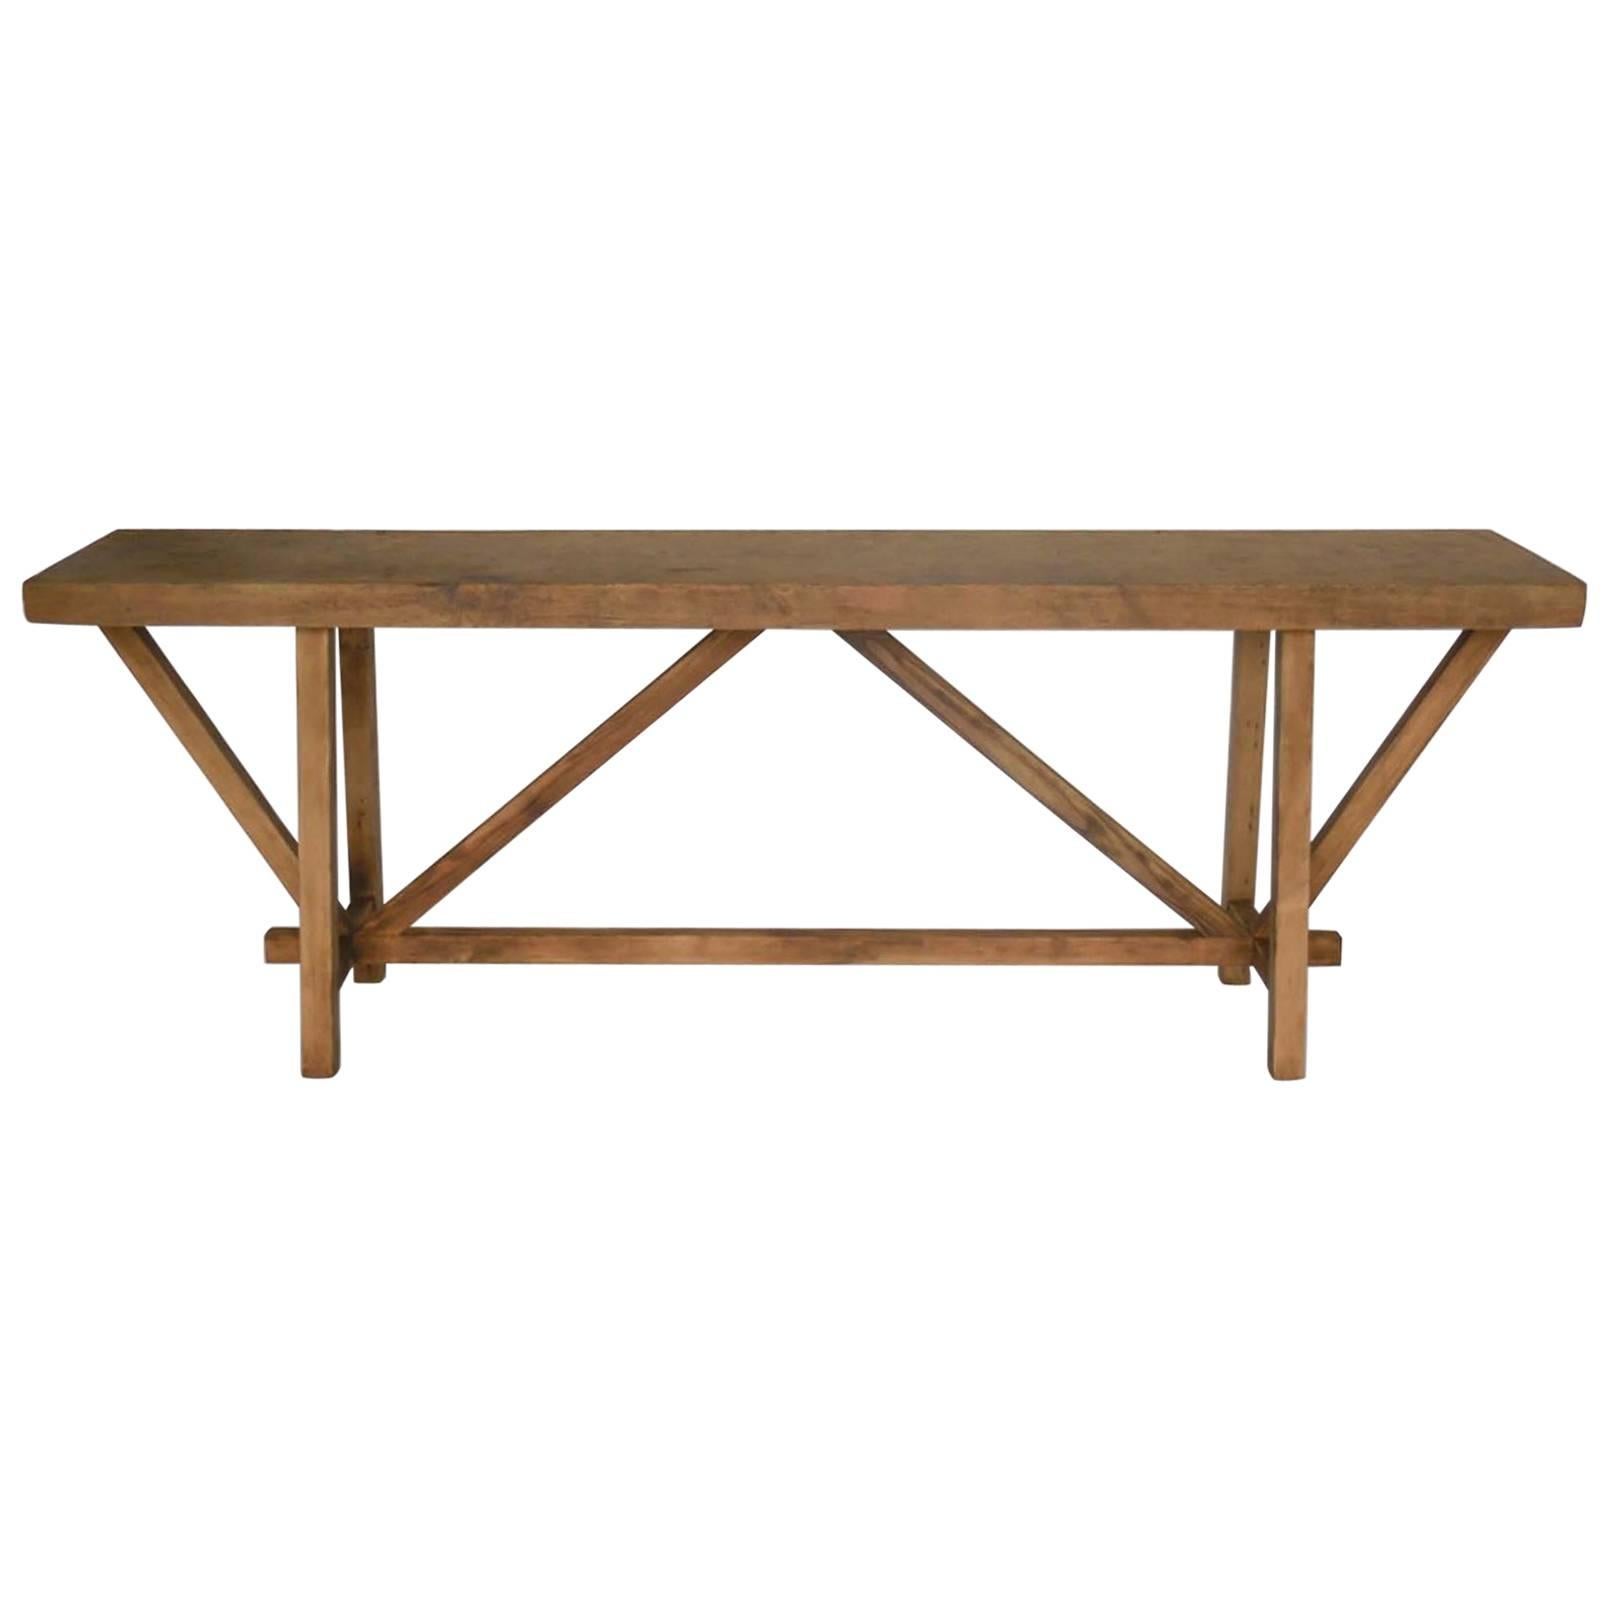 Japanese Wood Buttress Console